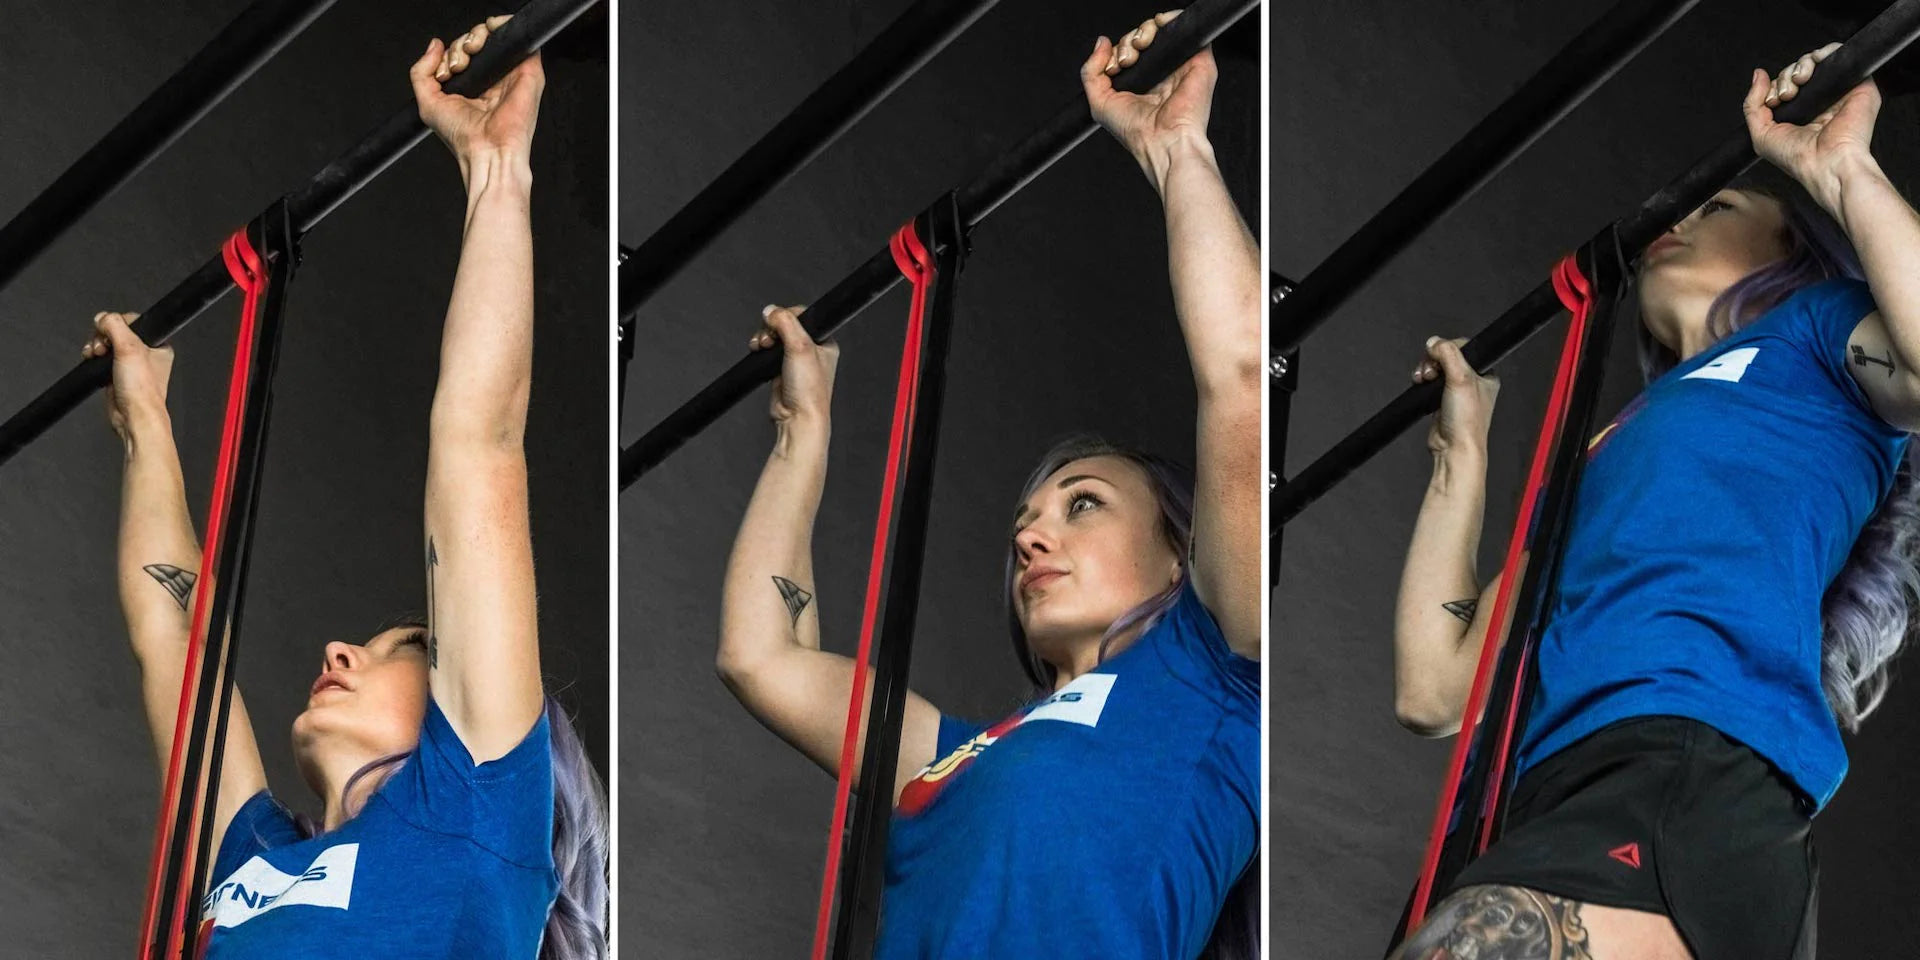 The 3 Best Pull-Up Bars of 2023